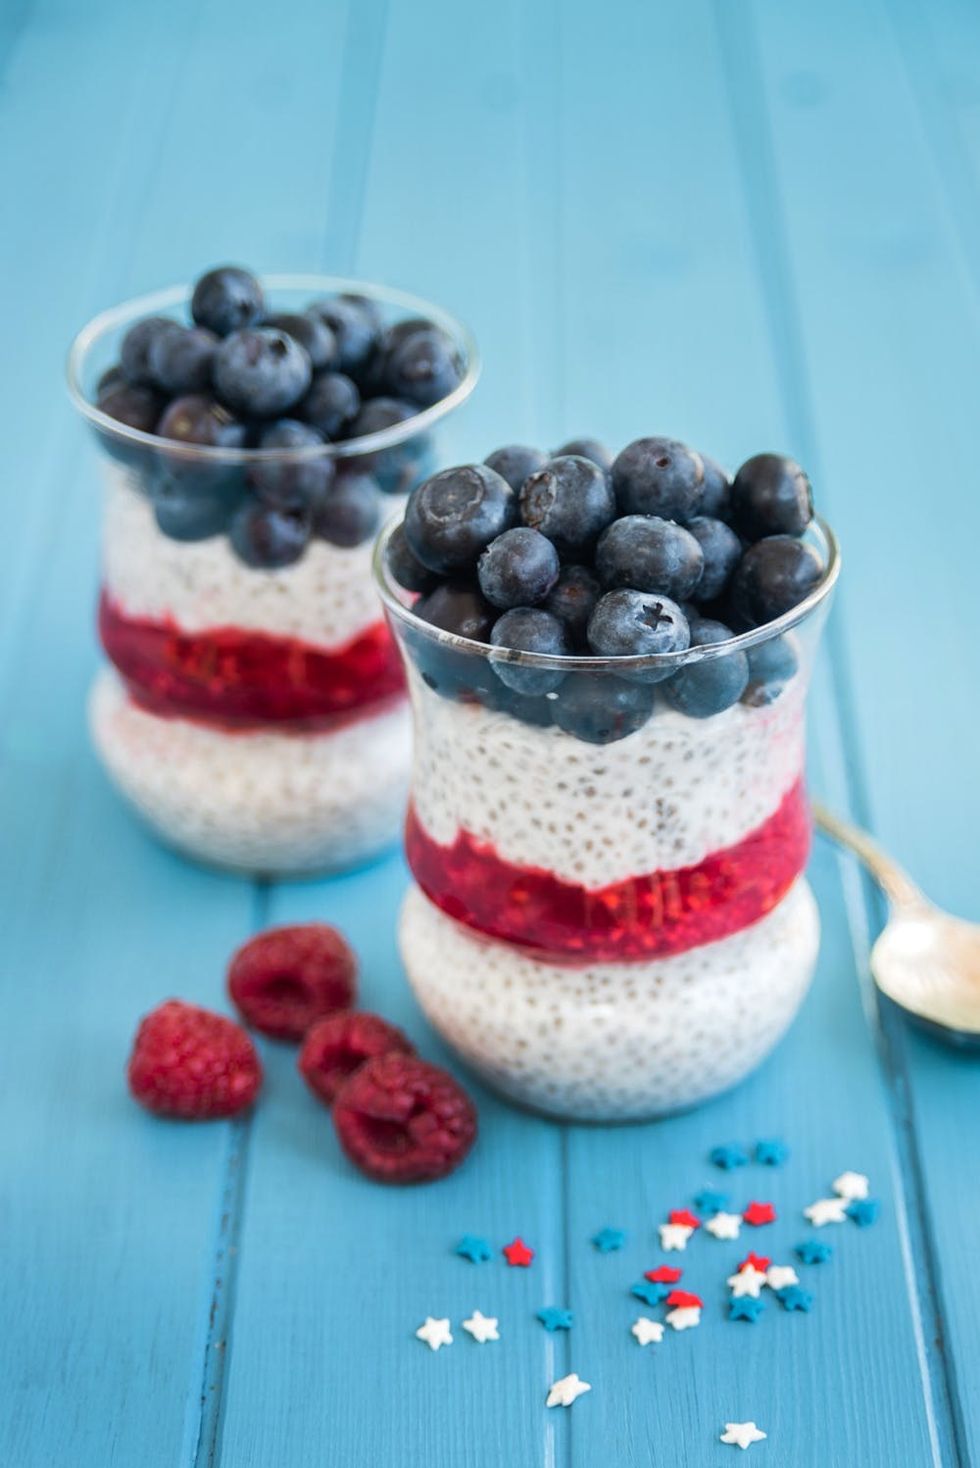 This 4th of July chia pudding is as patriotic as it is healthy!